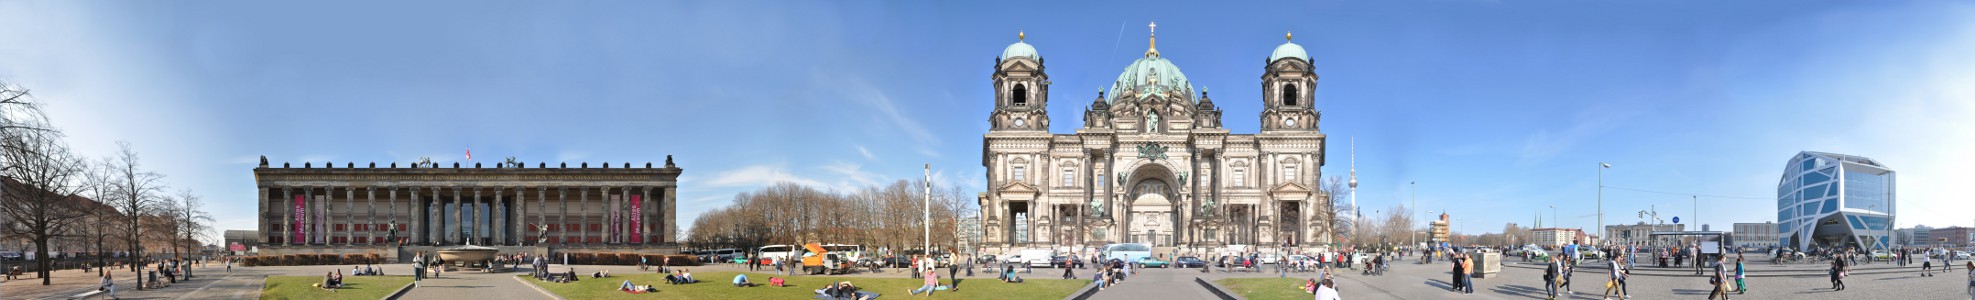 Lustgarten with Berlin Cathedral and Altes Museum